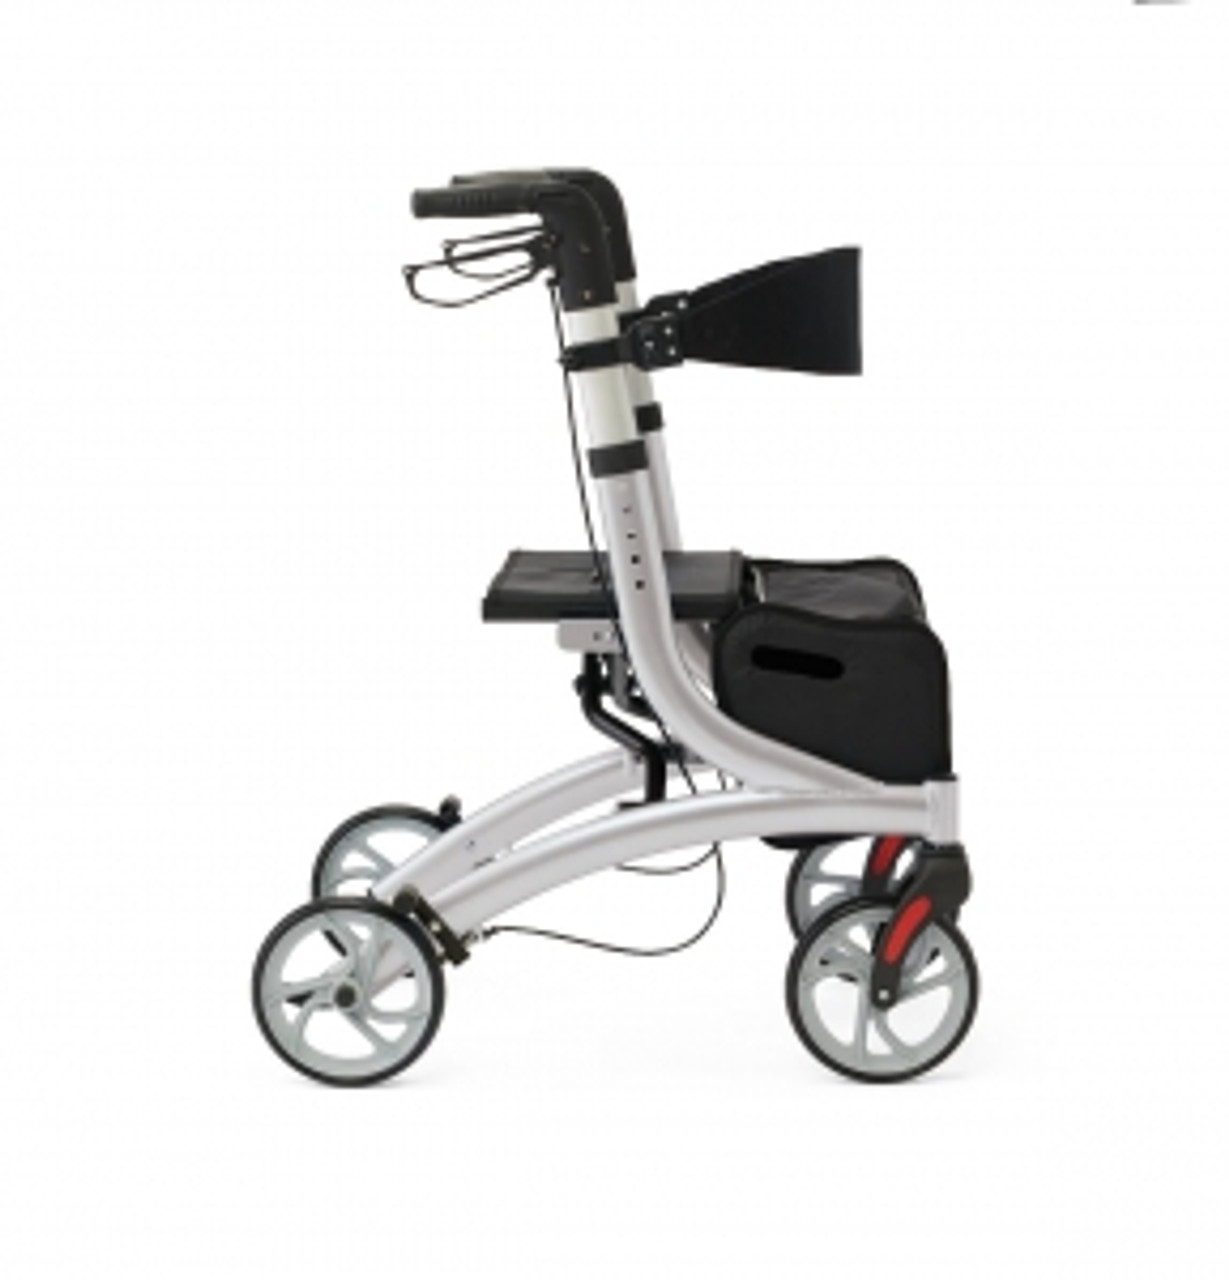 Rollator features adjustable handle height and backrest height for a custom fit
Simply push down and lock brakes to use as a seat
Smooth-rolling wheels make mobility a breeze
Comes with bag and backrest